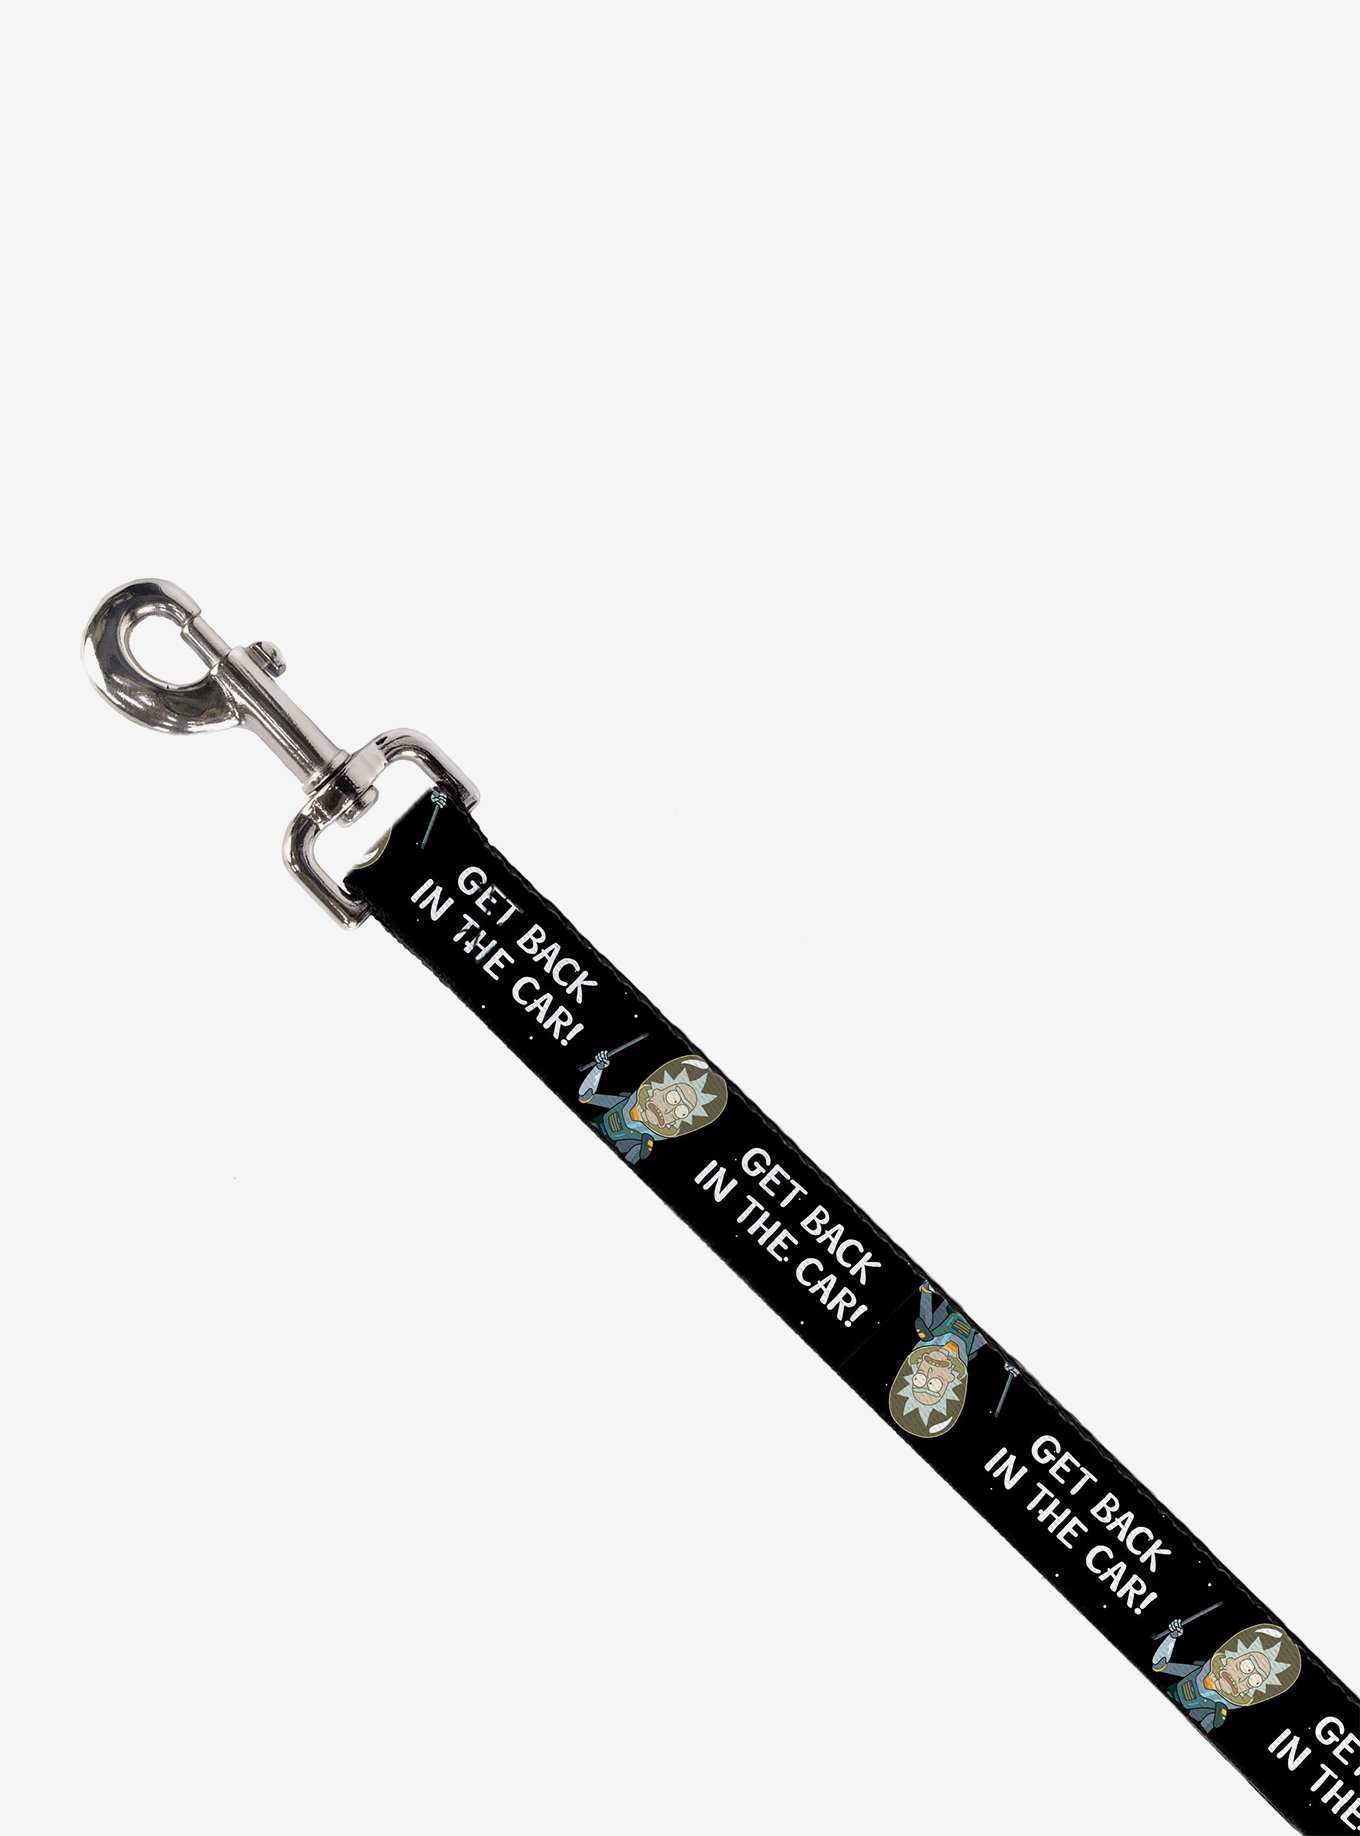 Rick and Morty Rick Get Back In The Car Pose Dog Leash, , hi-res